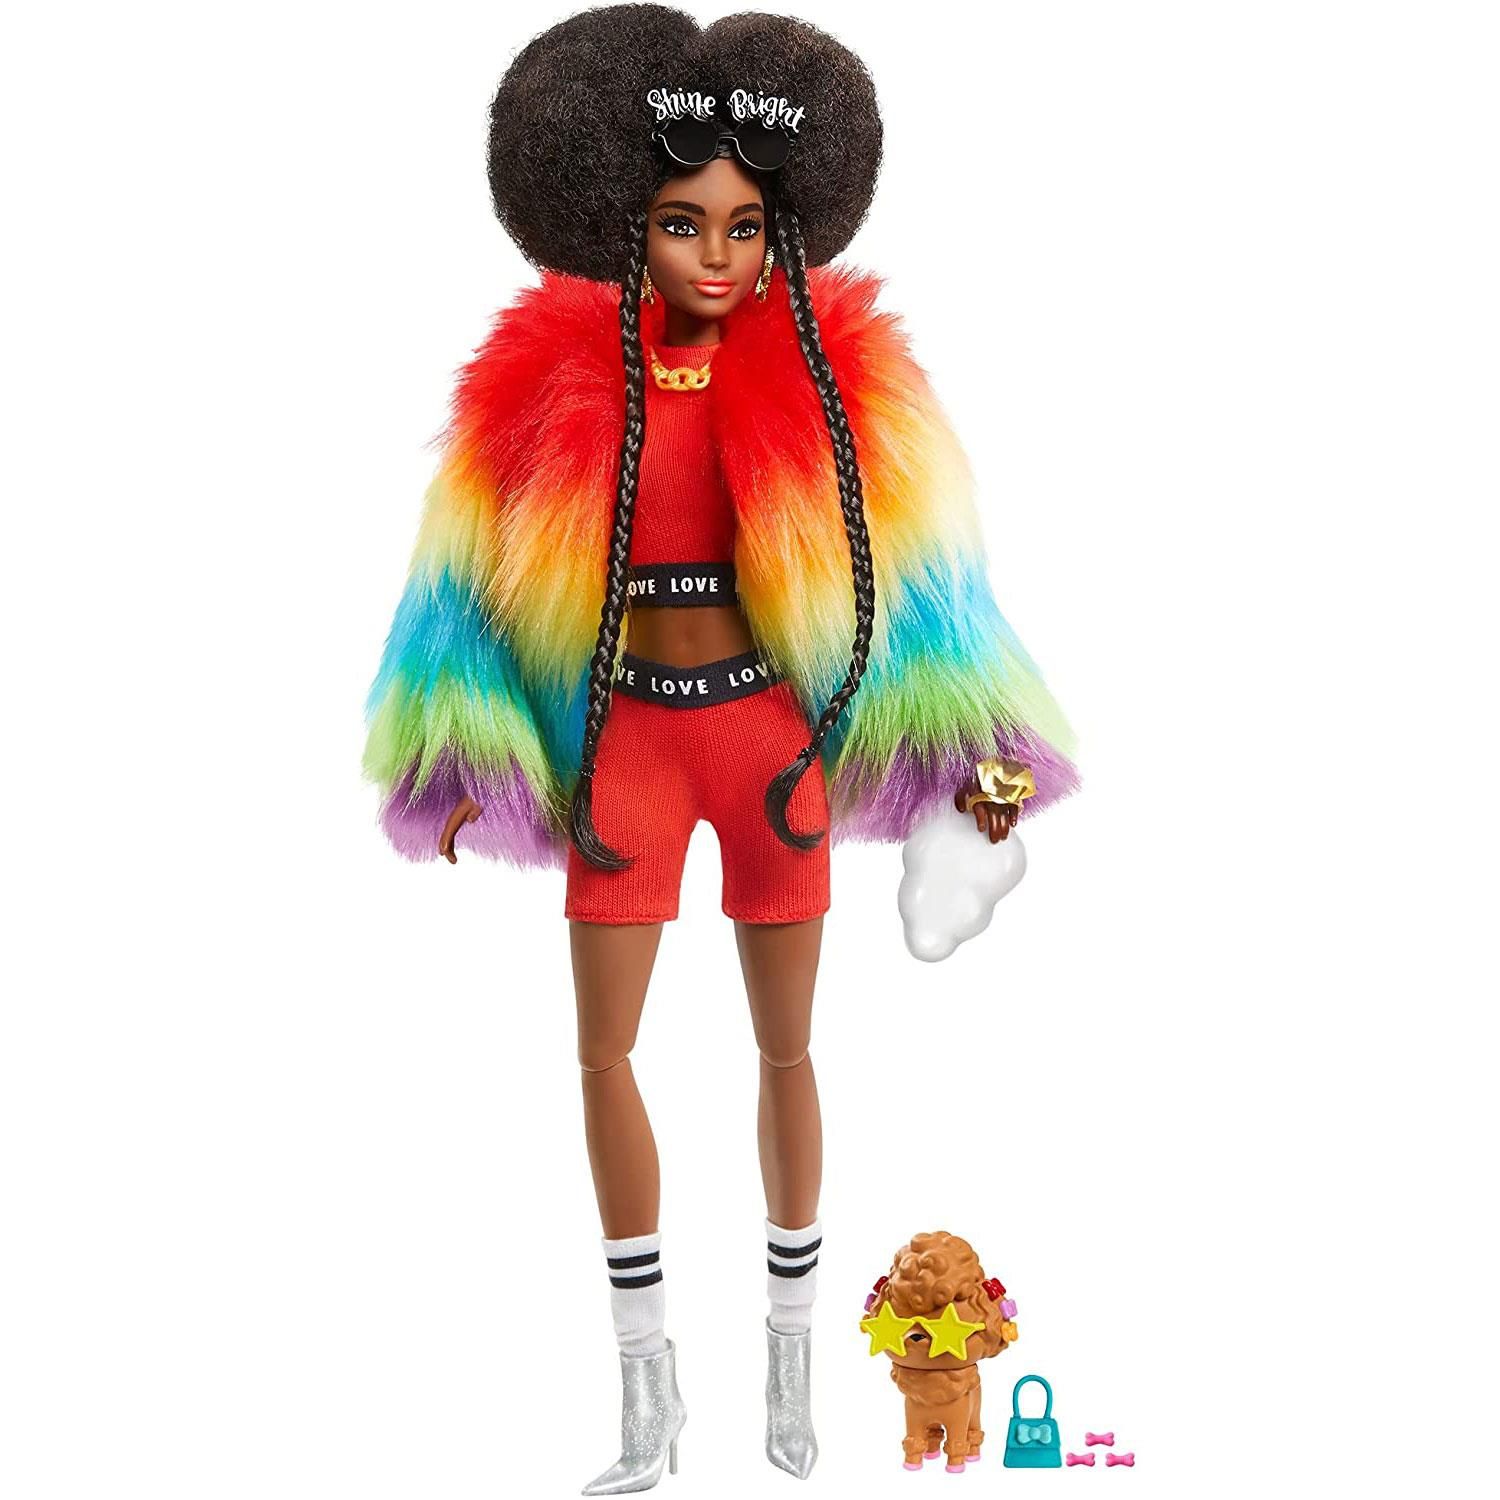 Barbie Extra dolls rock bold fashions and bright colors, and they make big statements! Each Barbie doll has its own unique style that's playful and over the top. And their pets -- each different and all adorable -- have tons of personality, too! Barbie Extra lets kids explore self-expression through style and offers an exciting fashion and styling play experience with posable dolls. They are all about having fun with fashion with glitter, gummy bears, emojis, and stand-out hair -- bringing EXTRA vibes wherever they go. Each is sold separately, subject to availability. Dolls cannot stand alone. Colors and decorations may vary.